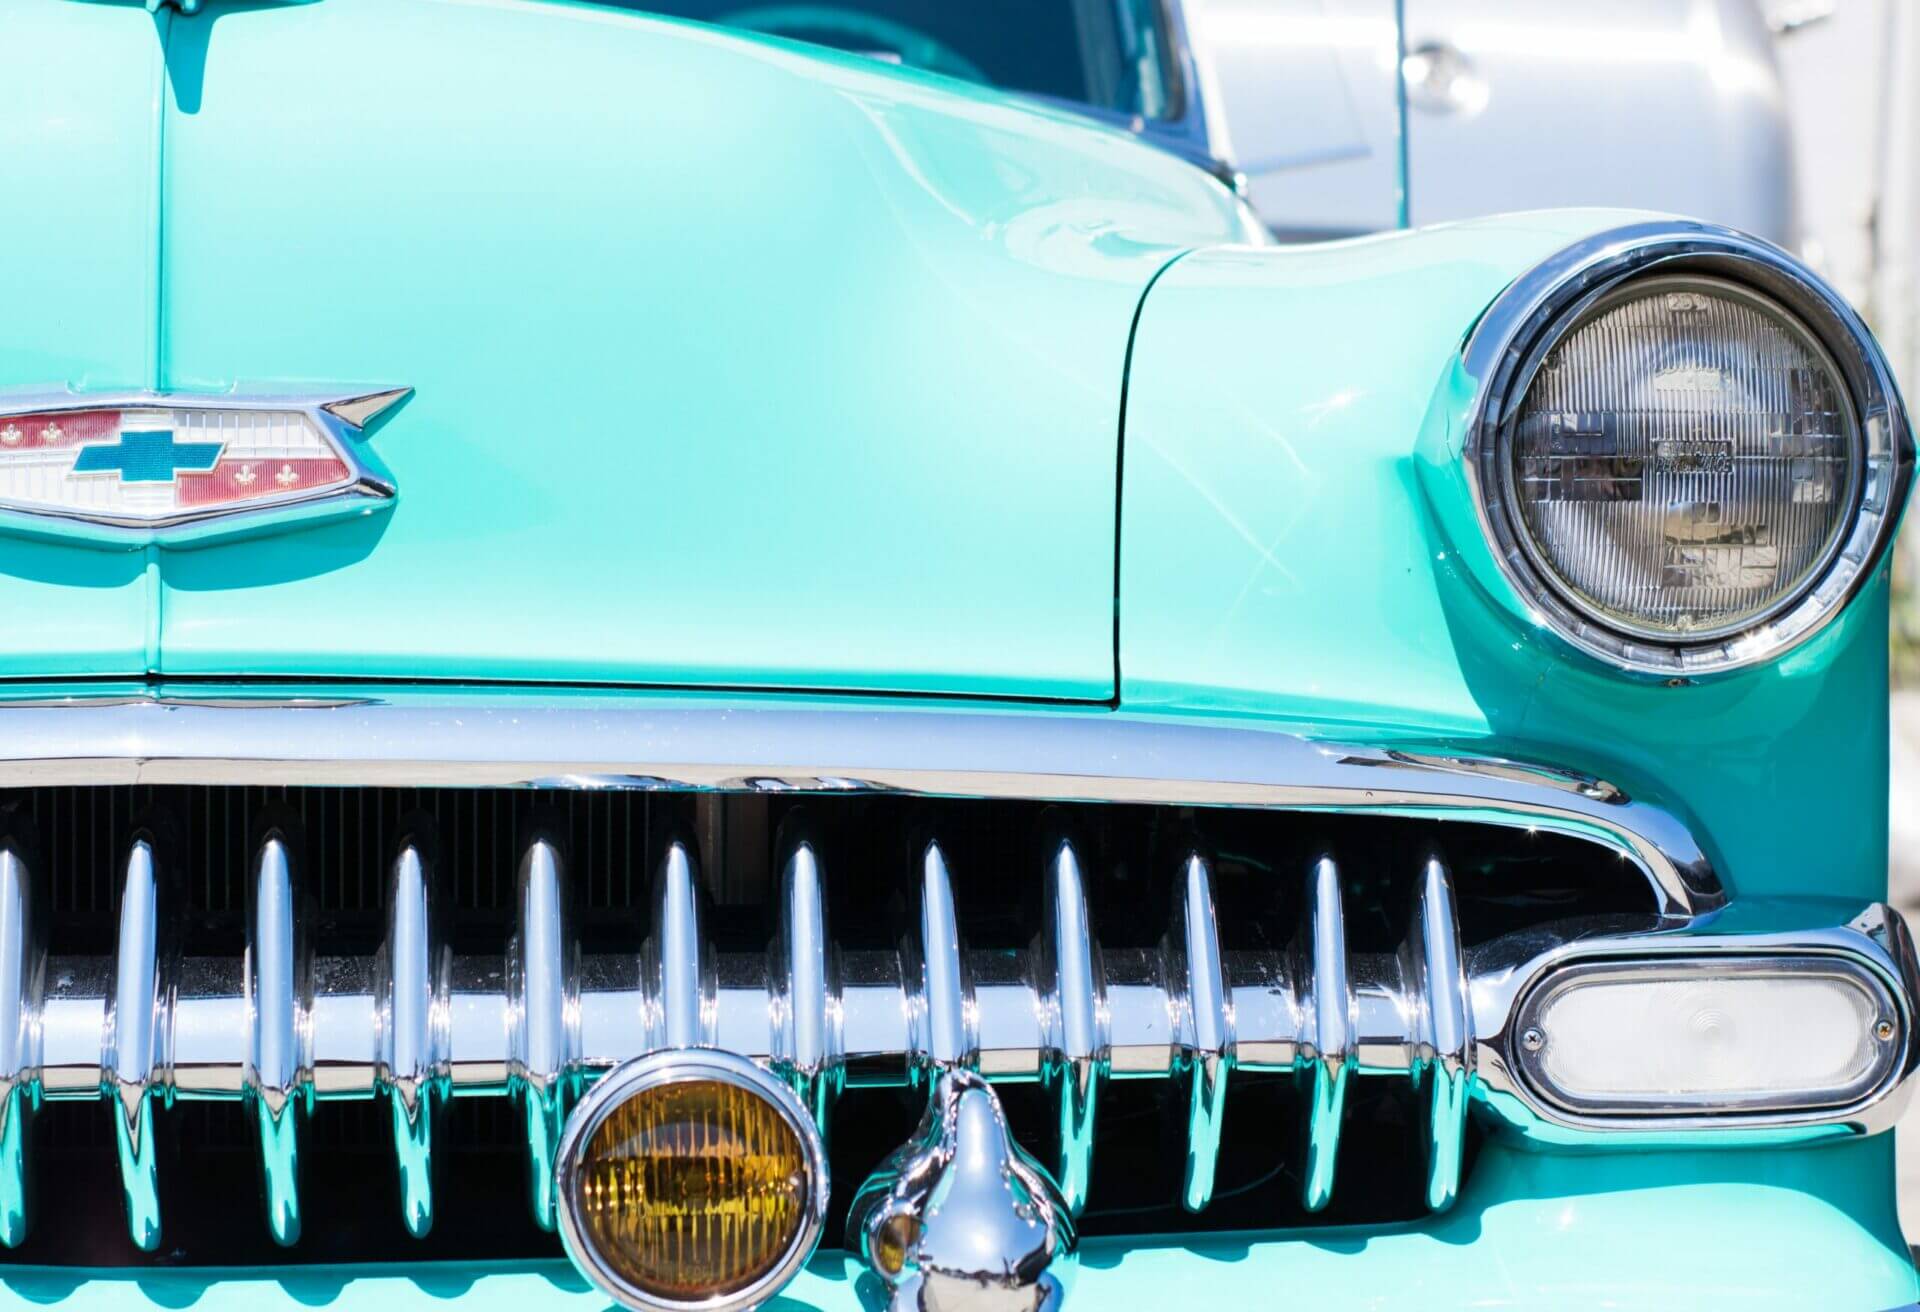 1950s Chevrolet. Are you looking for car transport companies that provide great car shipping prices with the chance to save money? Look no further! We offer some of the lowest average car shipping costs available in the industry today. 